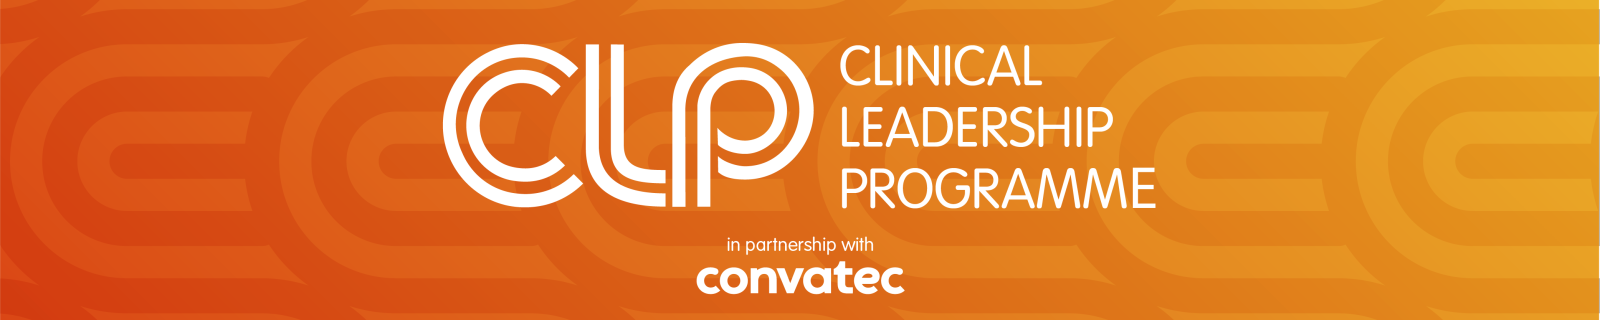 Clinical Leadership Programme